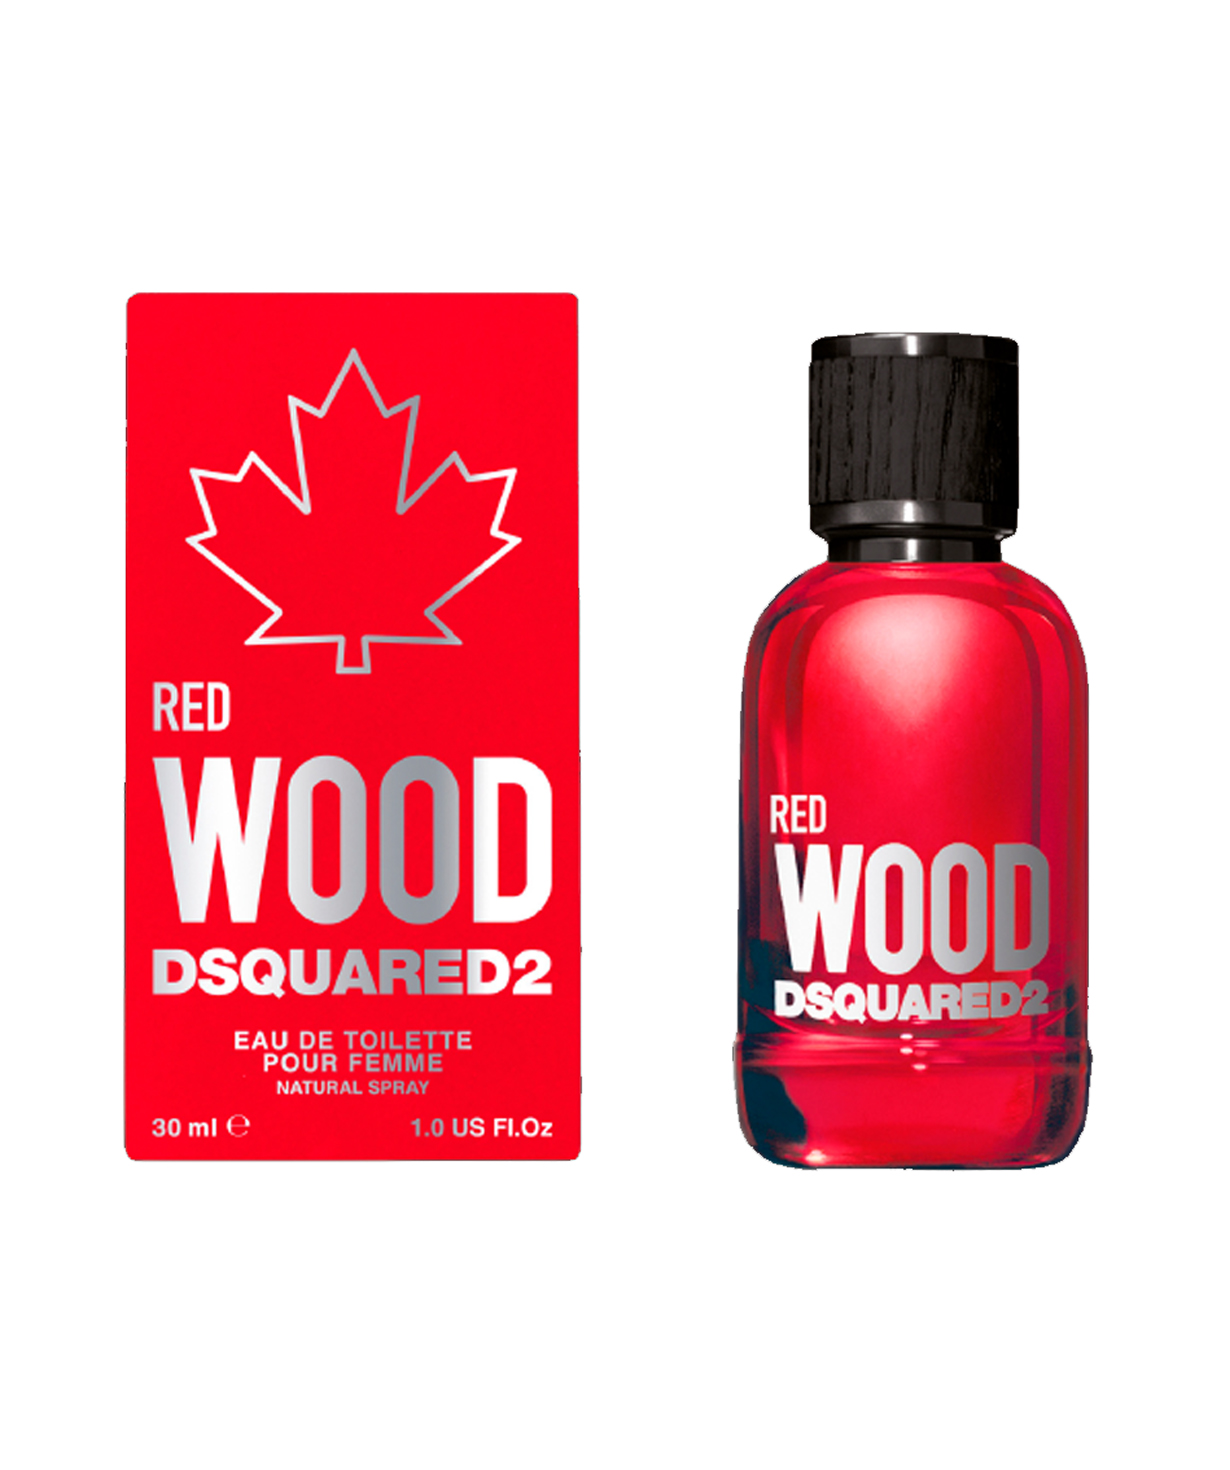 Perfume «Dsquared2» Red Wood, for women, 30 ml